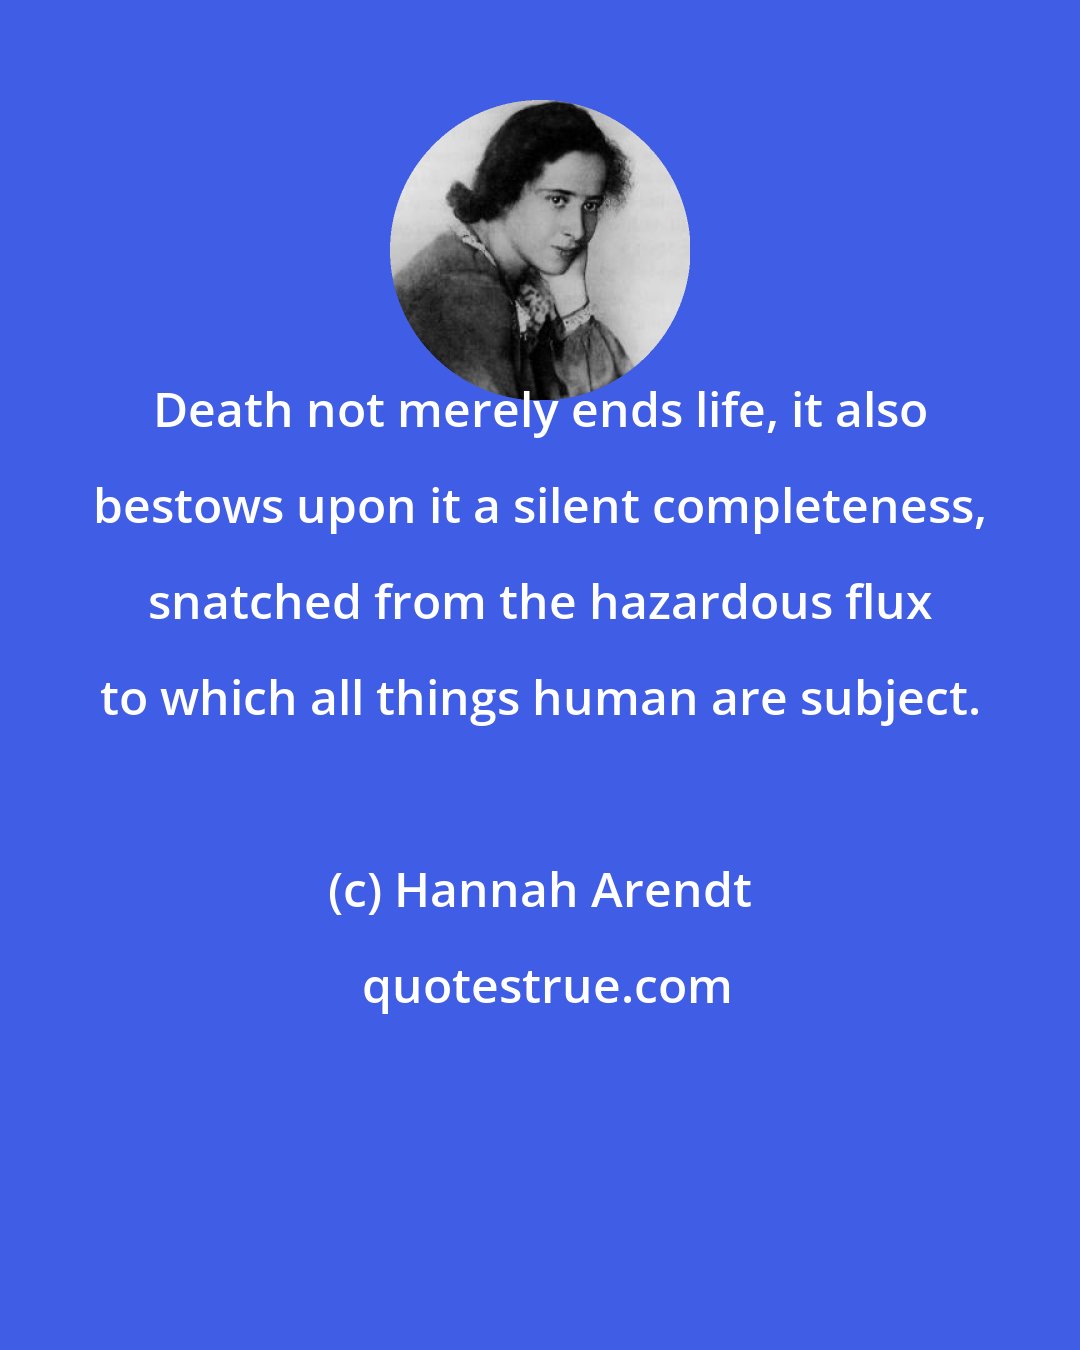 Hannah Arendt: Death not merely ends life, it also bestows upon it a silent completeness, snatched from the hazardous flux to which all things human are subject.